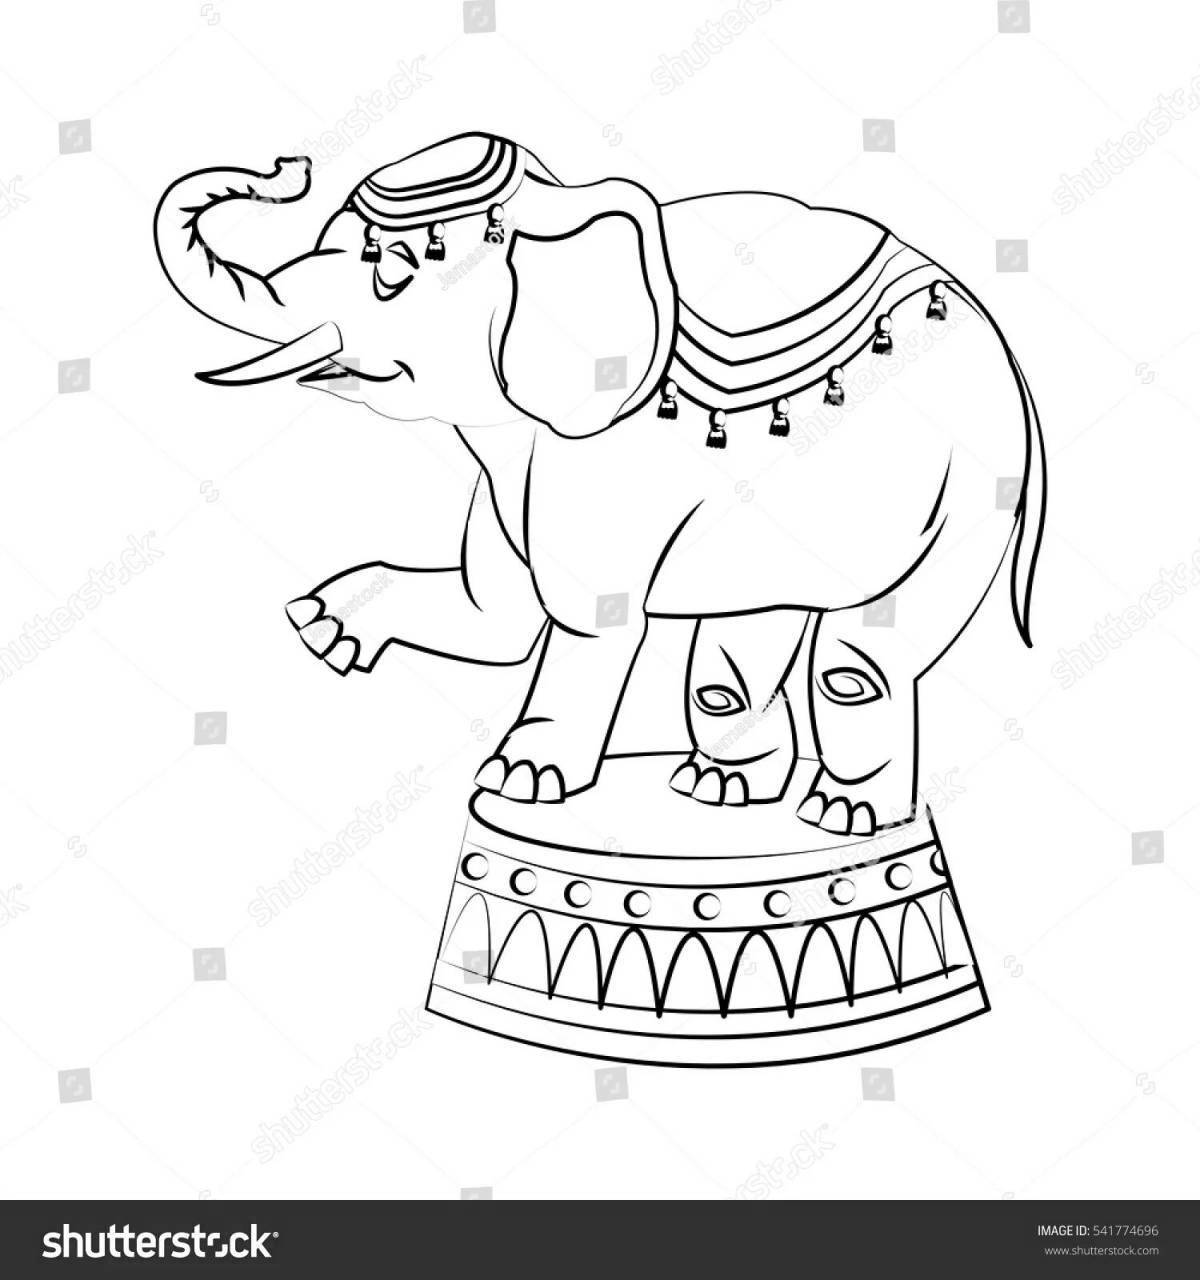 Coloring page spectacular circus elephant